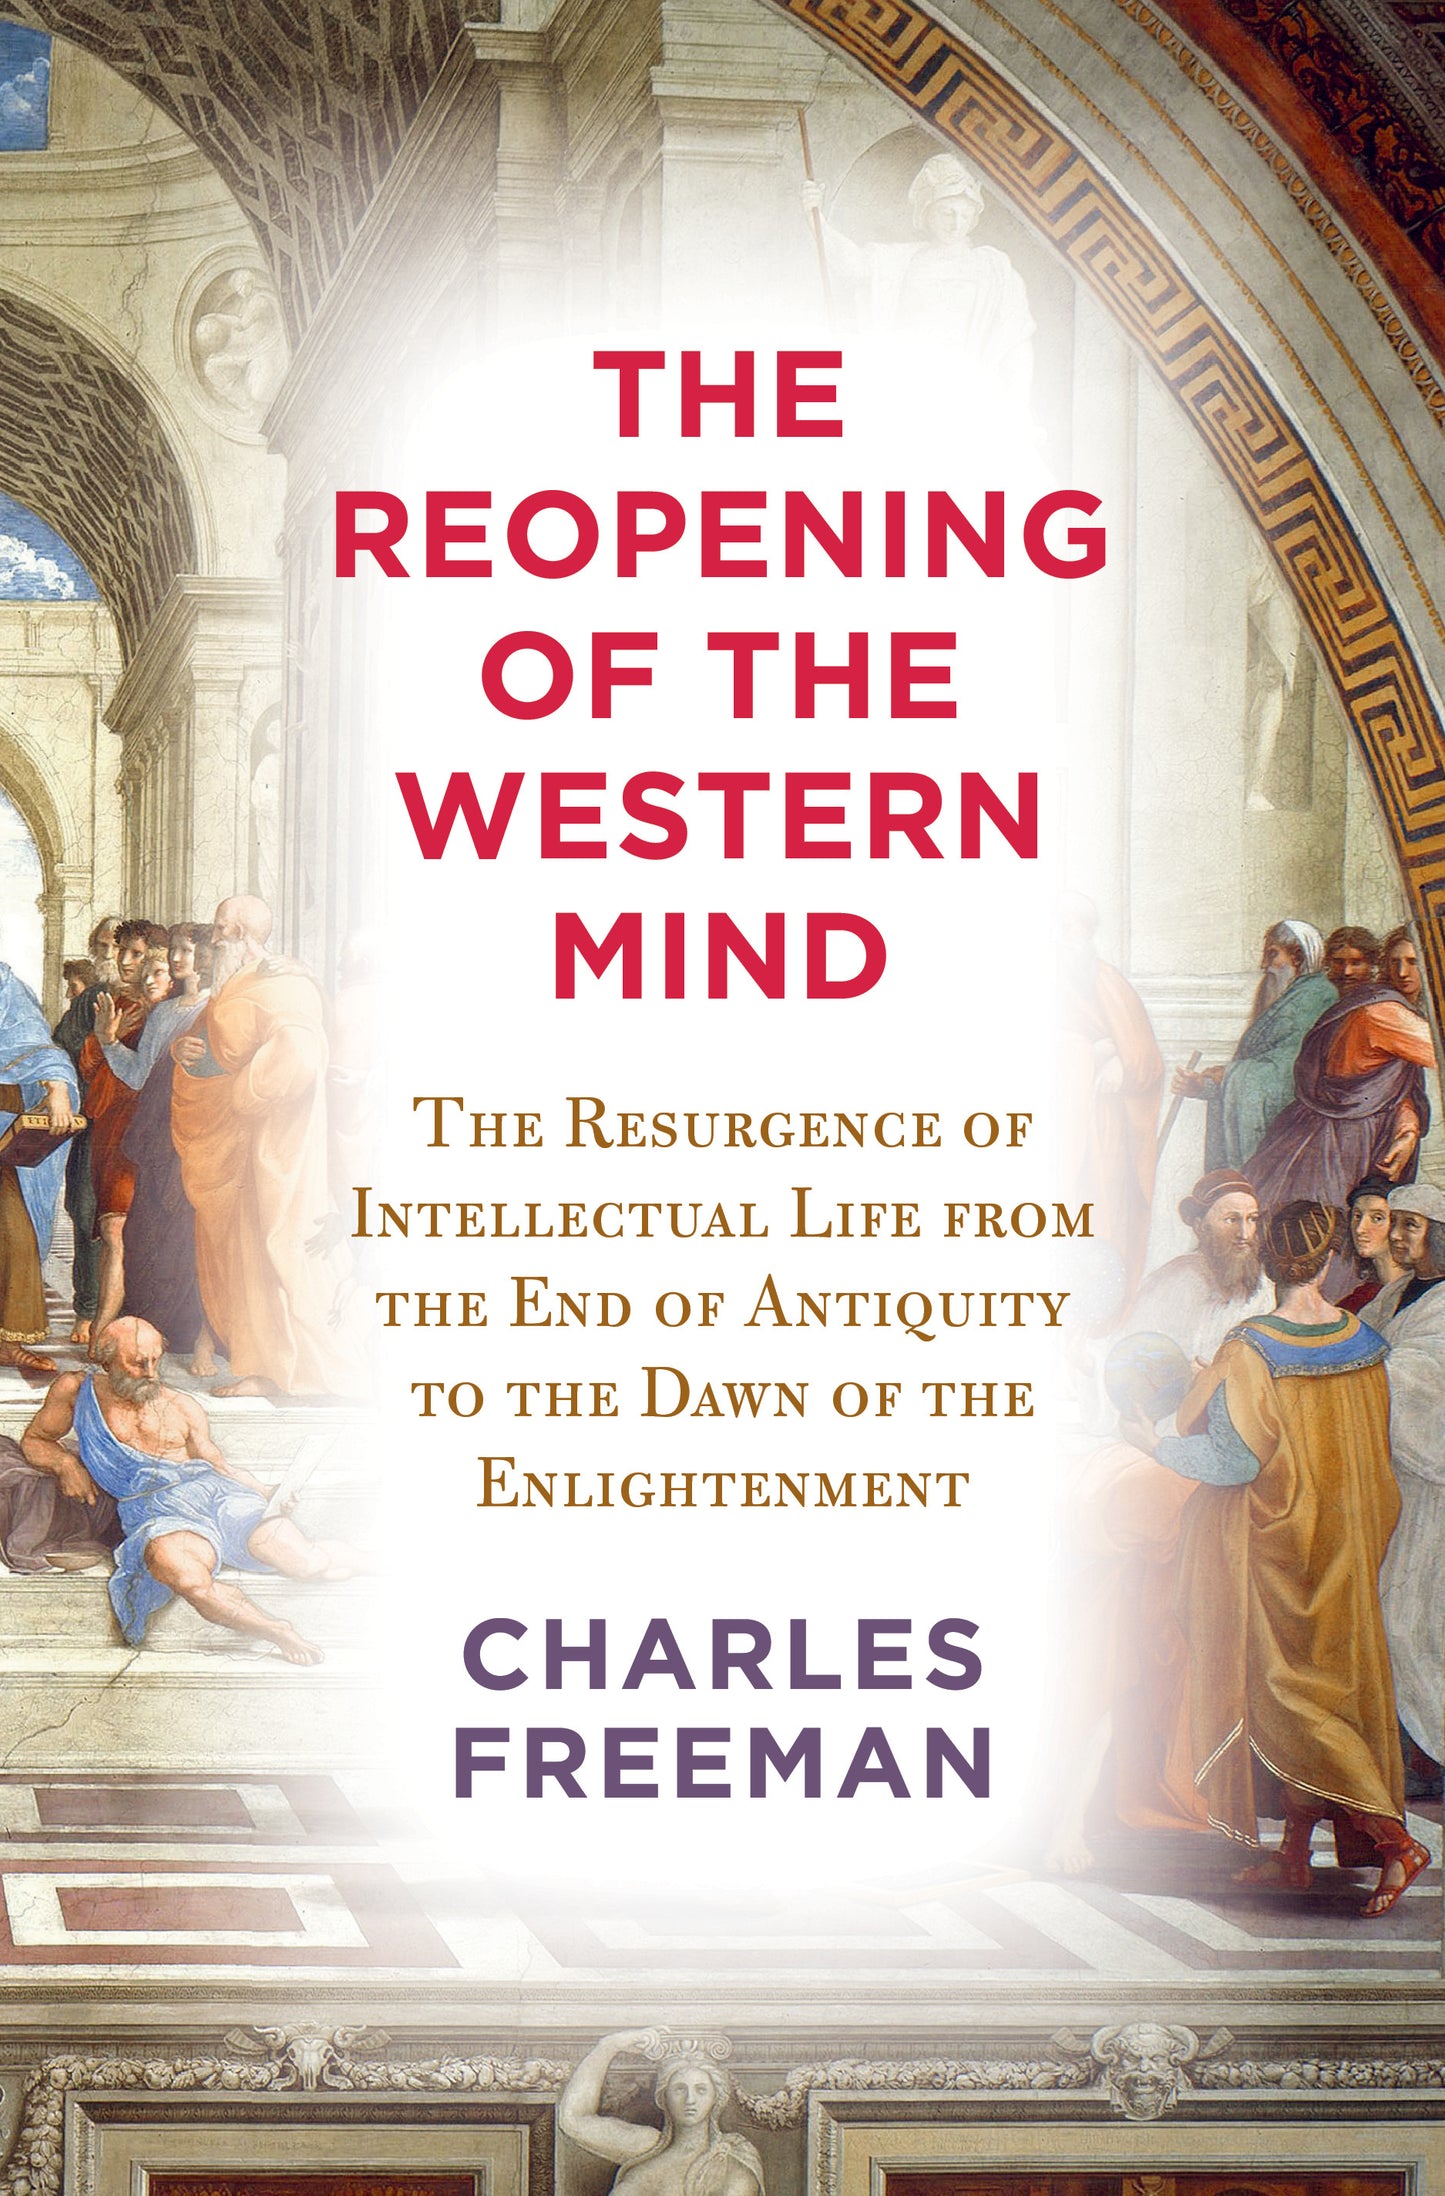 The Reopening of the Western Mind